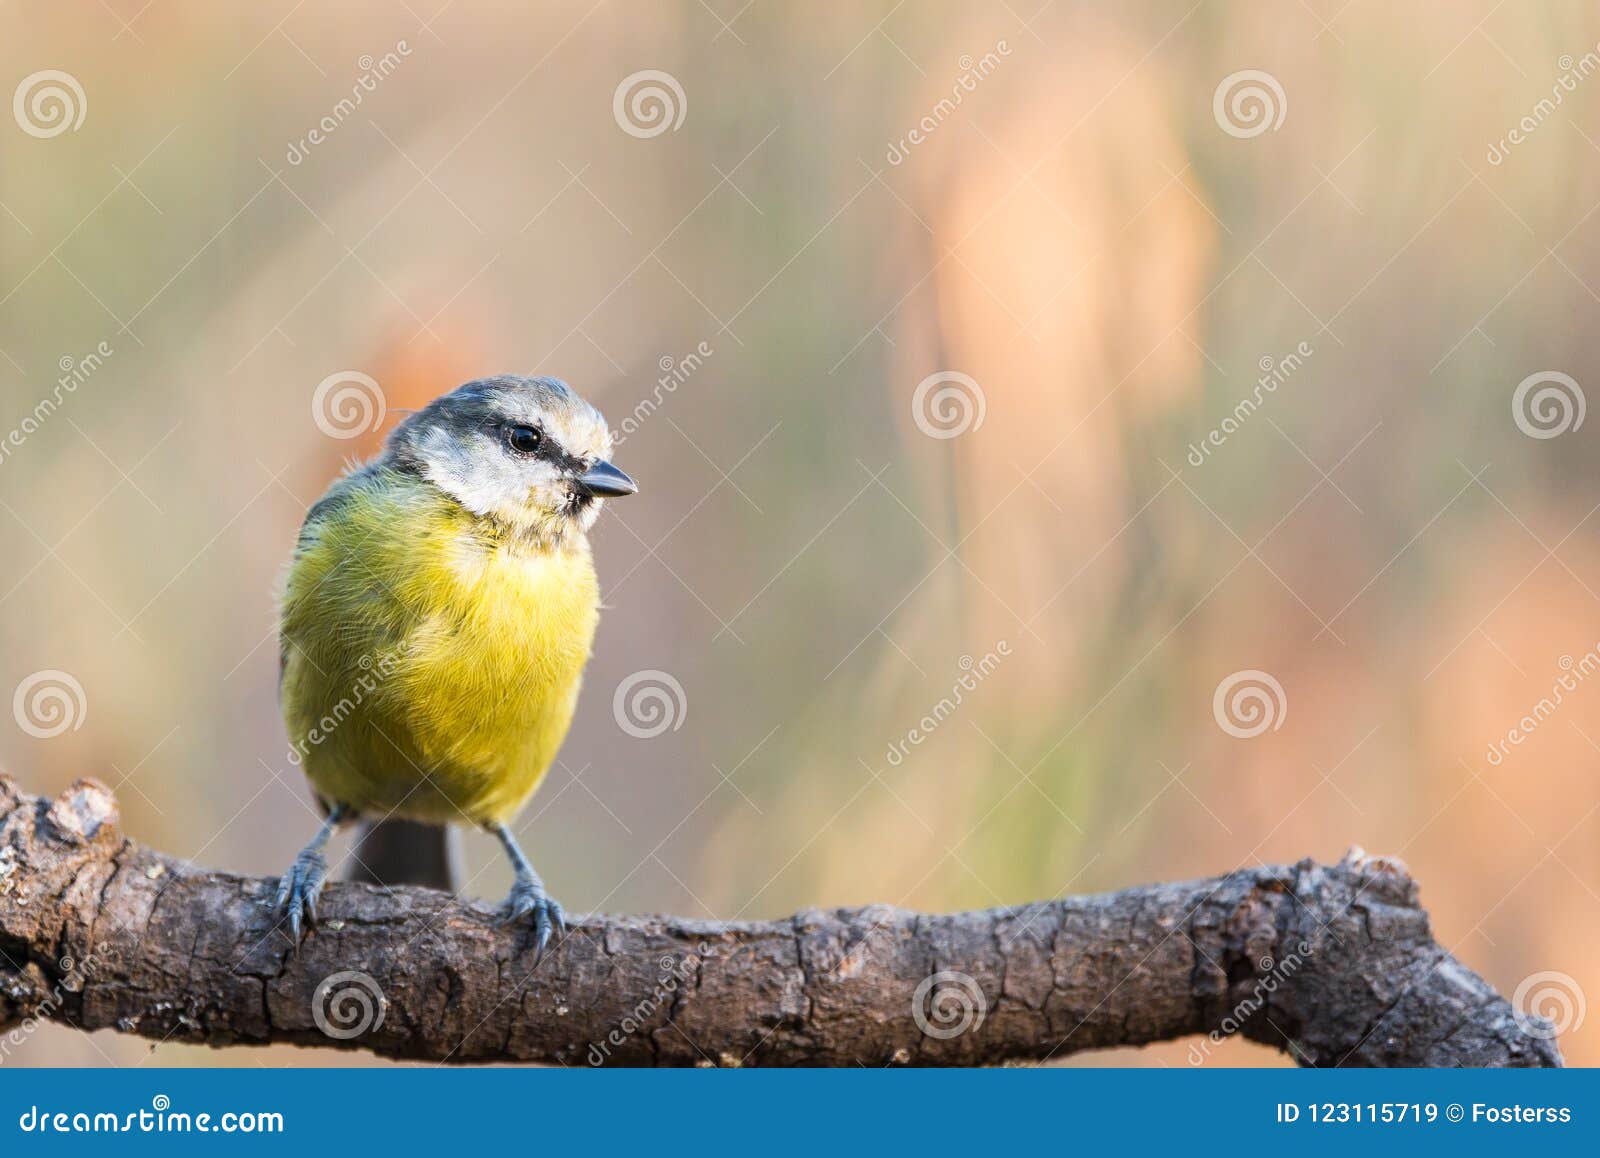 yong eurasian blue tit cyanistes caeruleus on branch with copy